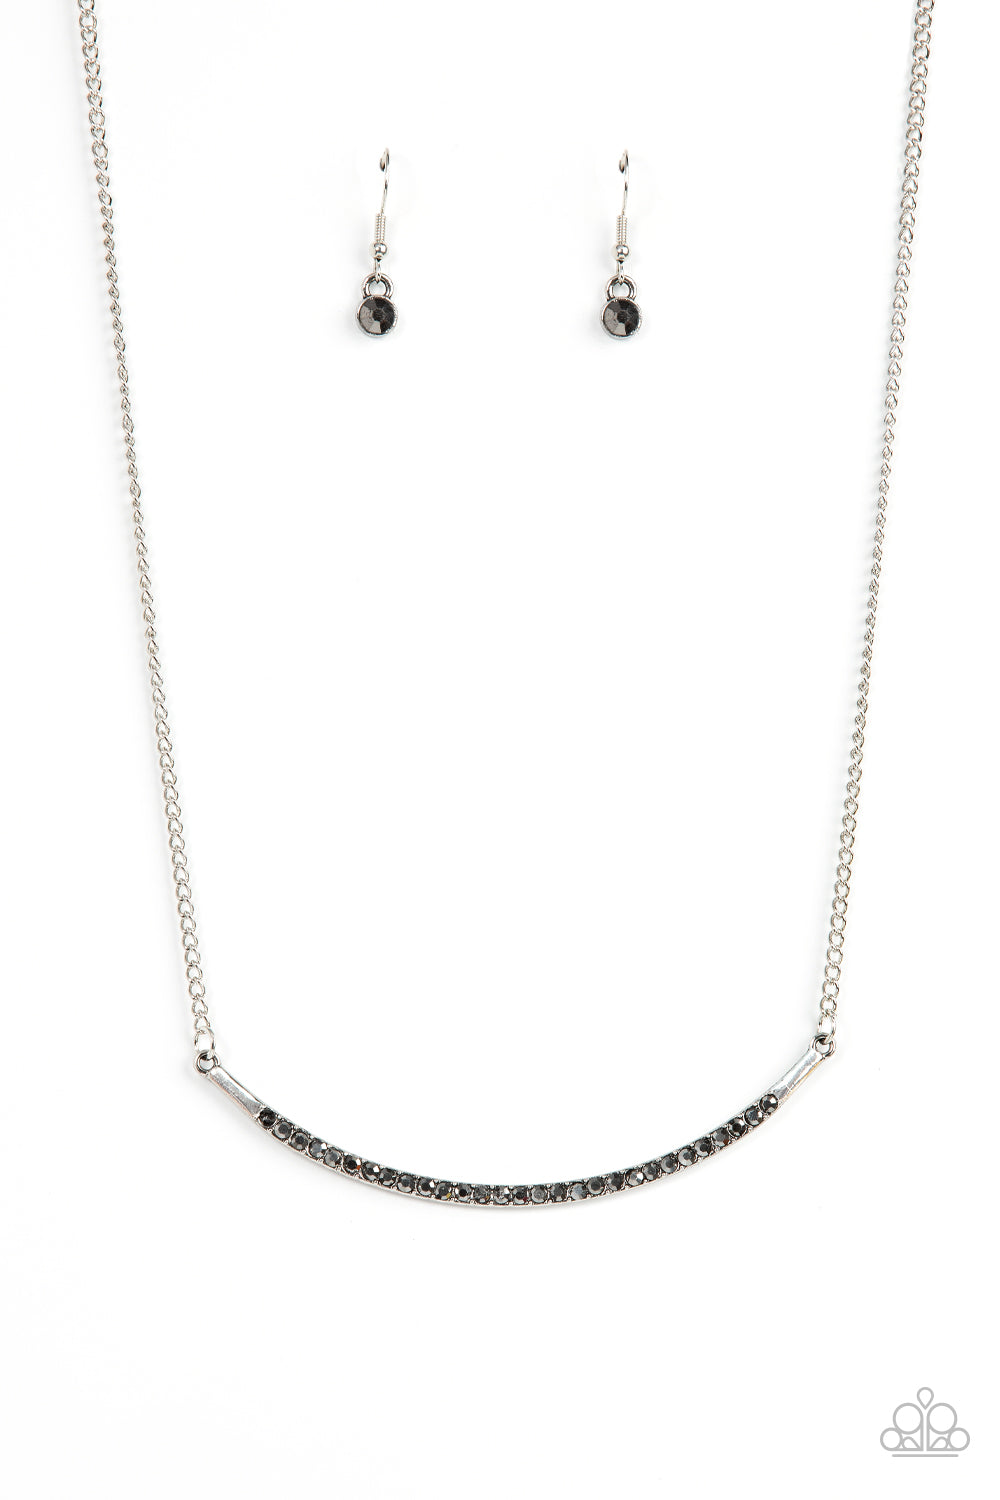 Collar Poppin Sparkle - Silver Fashion Necklace - Paparazzi Accessories - Encrusted in smoky hematite rhinestones, a curved silver bar bows below the collar for a smoldering style. Features an adjustable clasp closure.